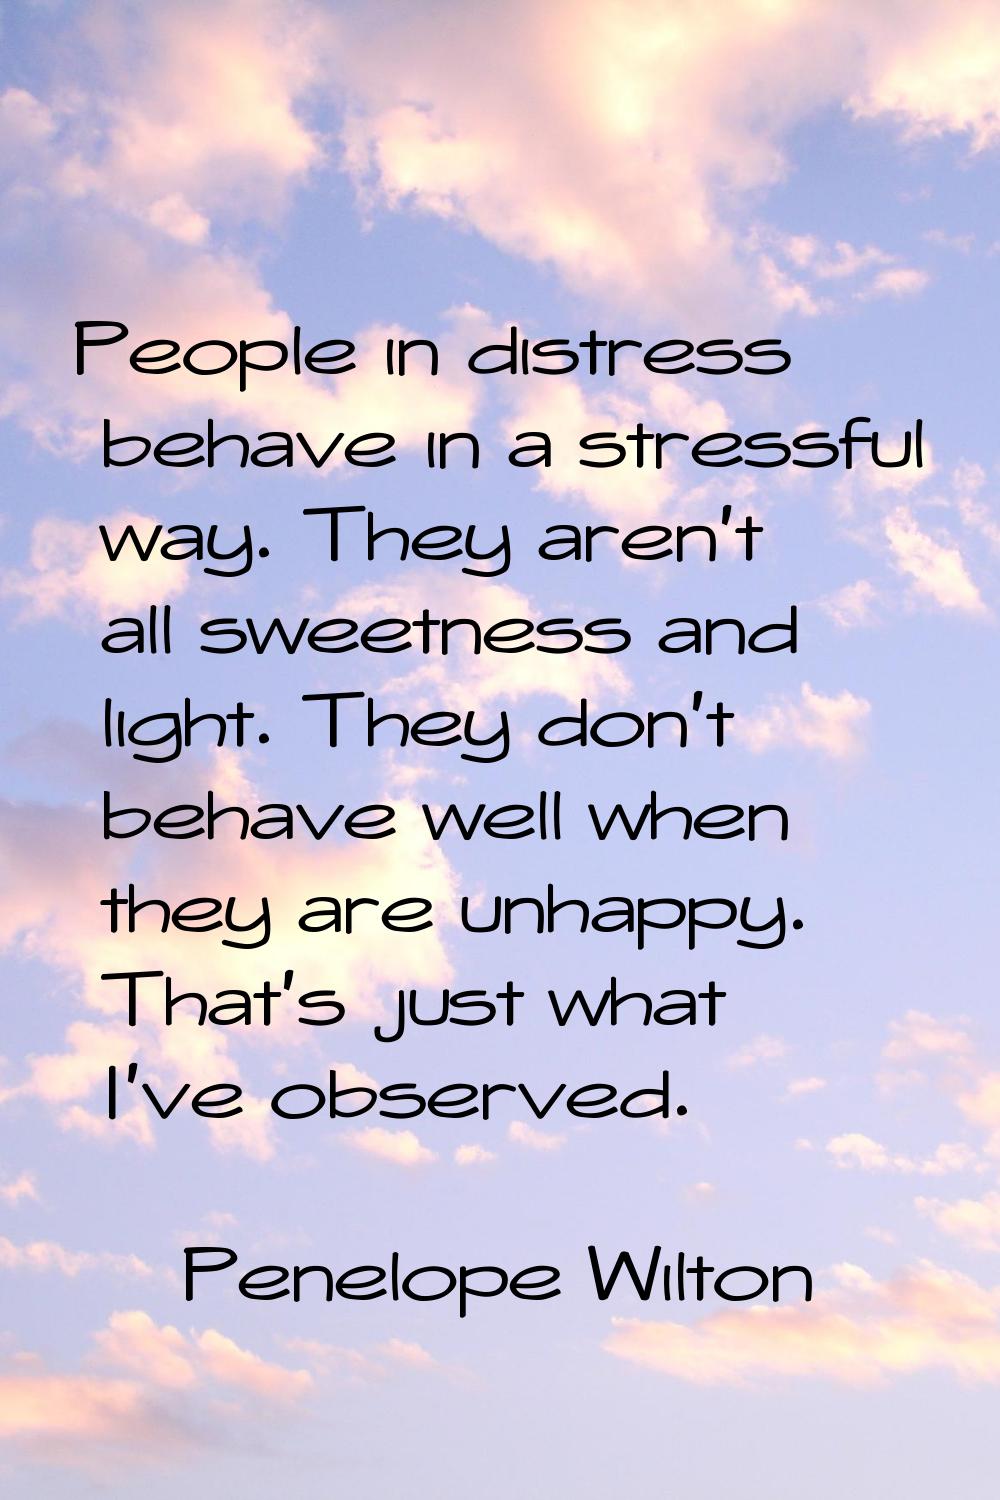 People in distress behave in a stressful way. They aren't all sweetness and light. They don't behav